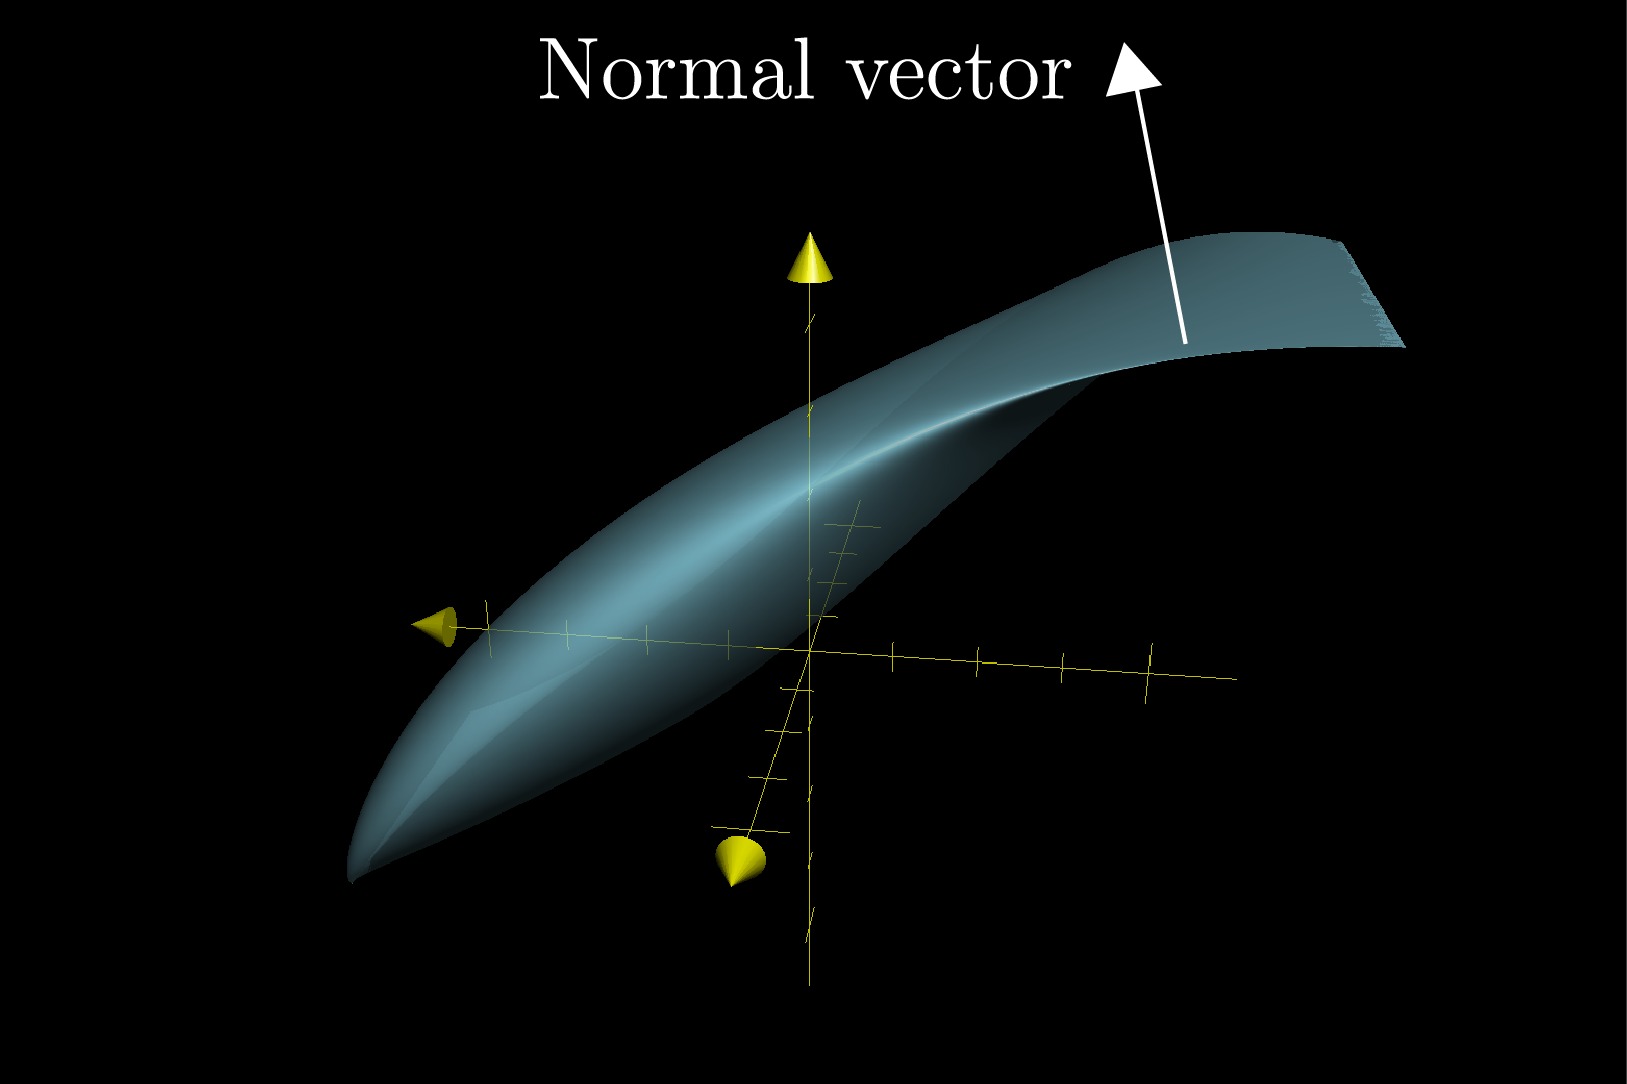 The Ultimate Guide To Finding The Normal Vector And Direction Of A Plane!